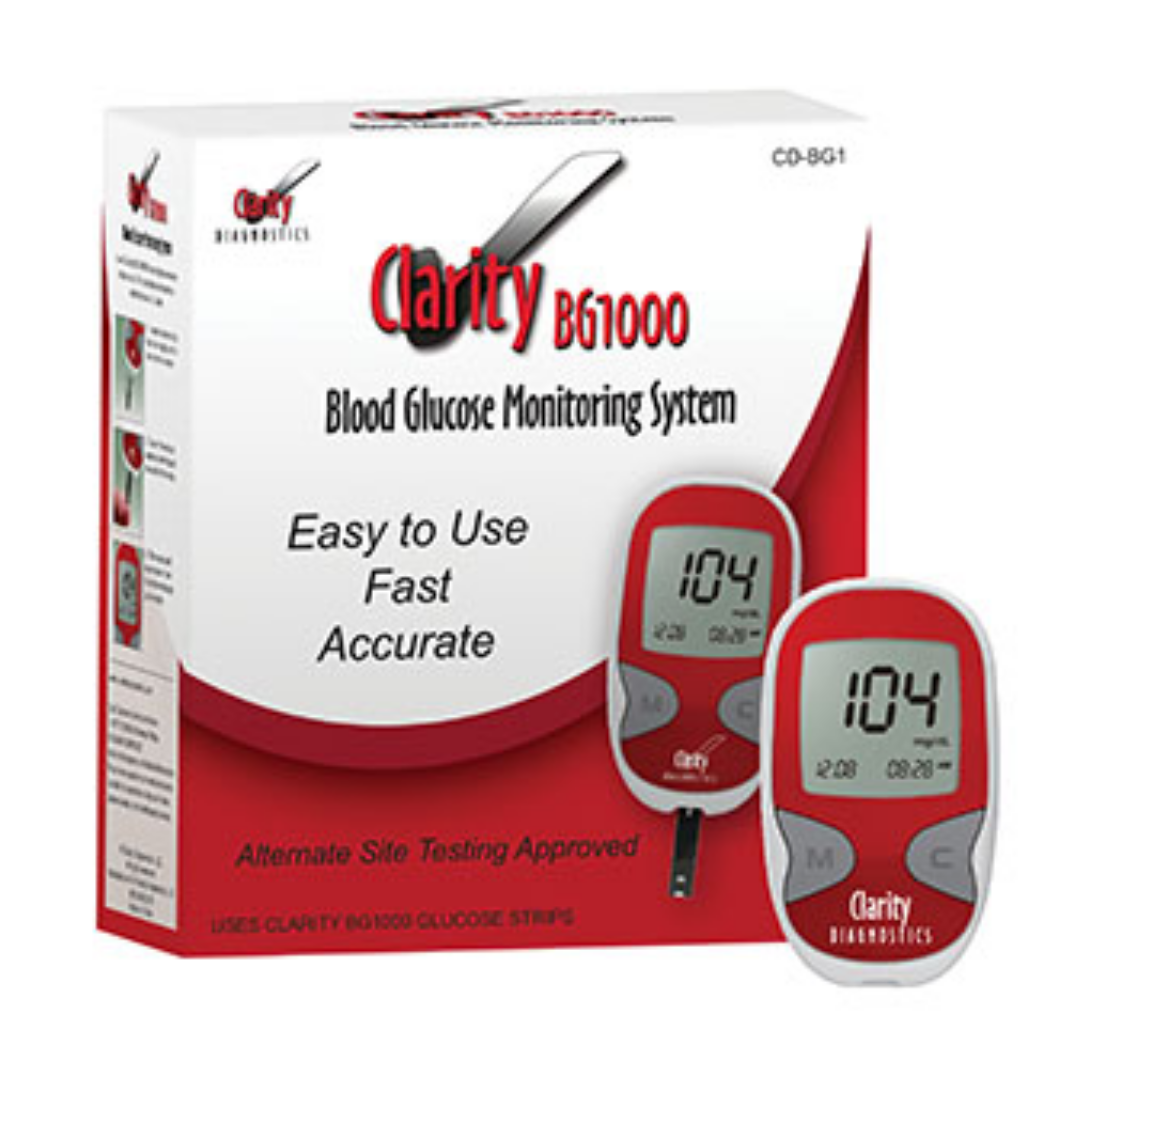 Picture of Clarity BG1000 Blood Glucose Meter Kit